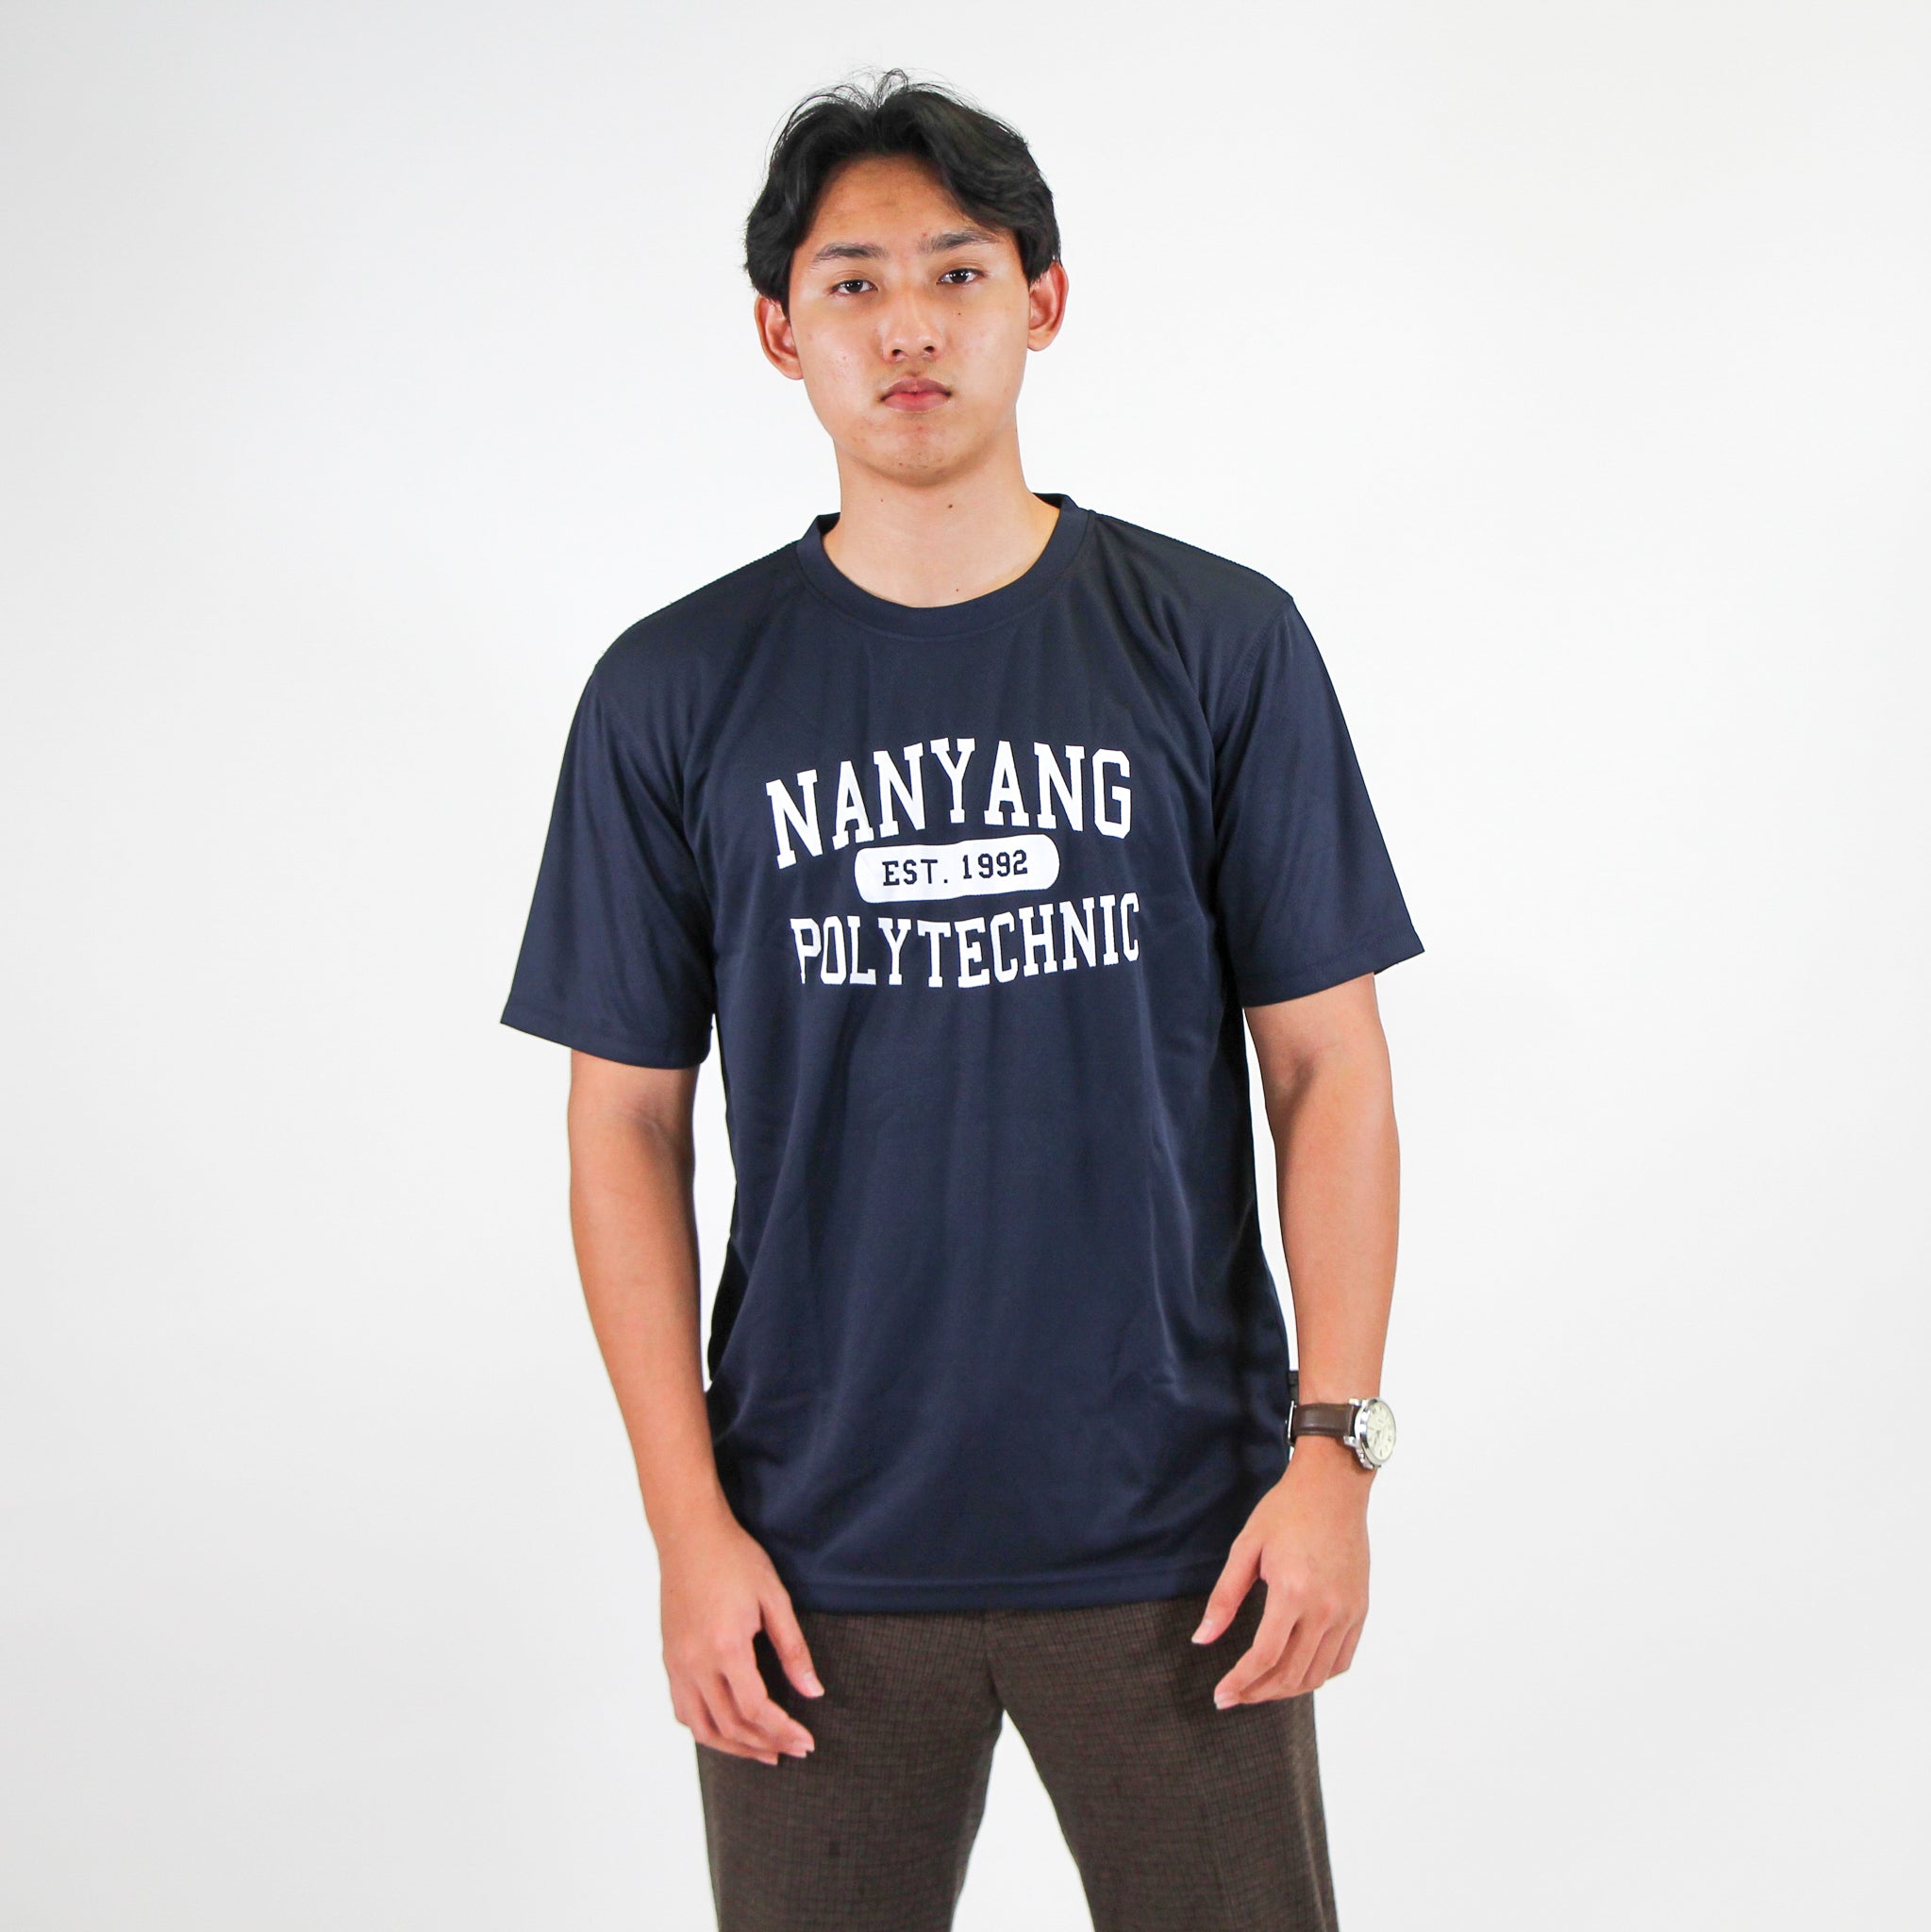 NYP 1992 DRI-FIT T-SHIRT (NAVY WITH WHITE FONT)